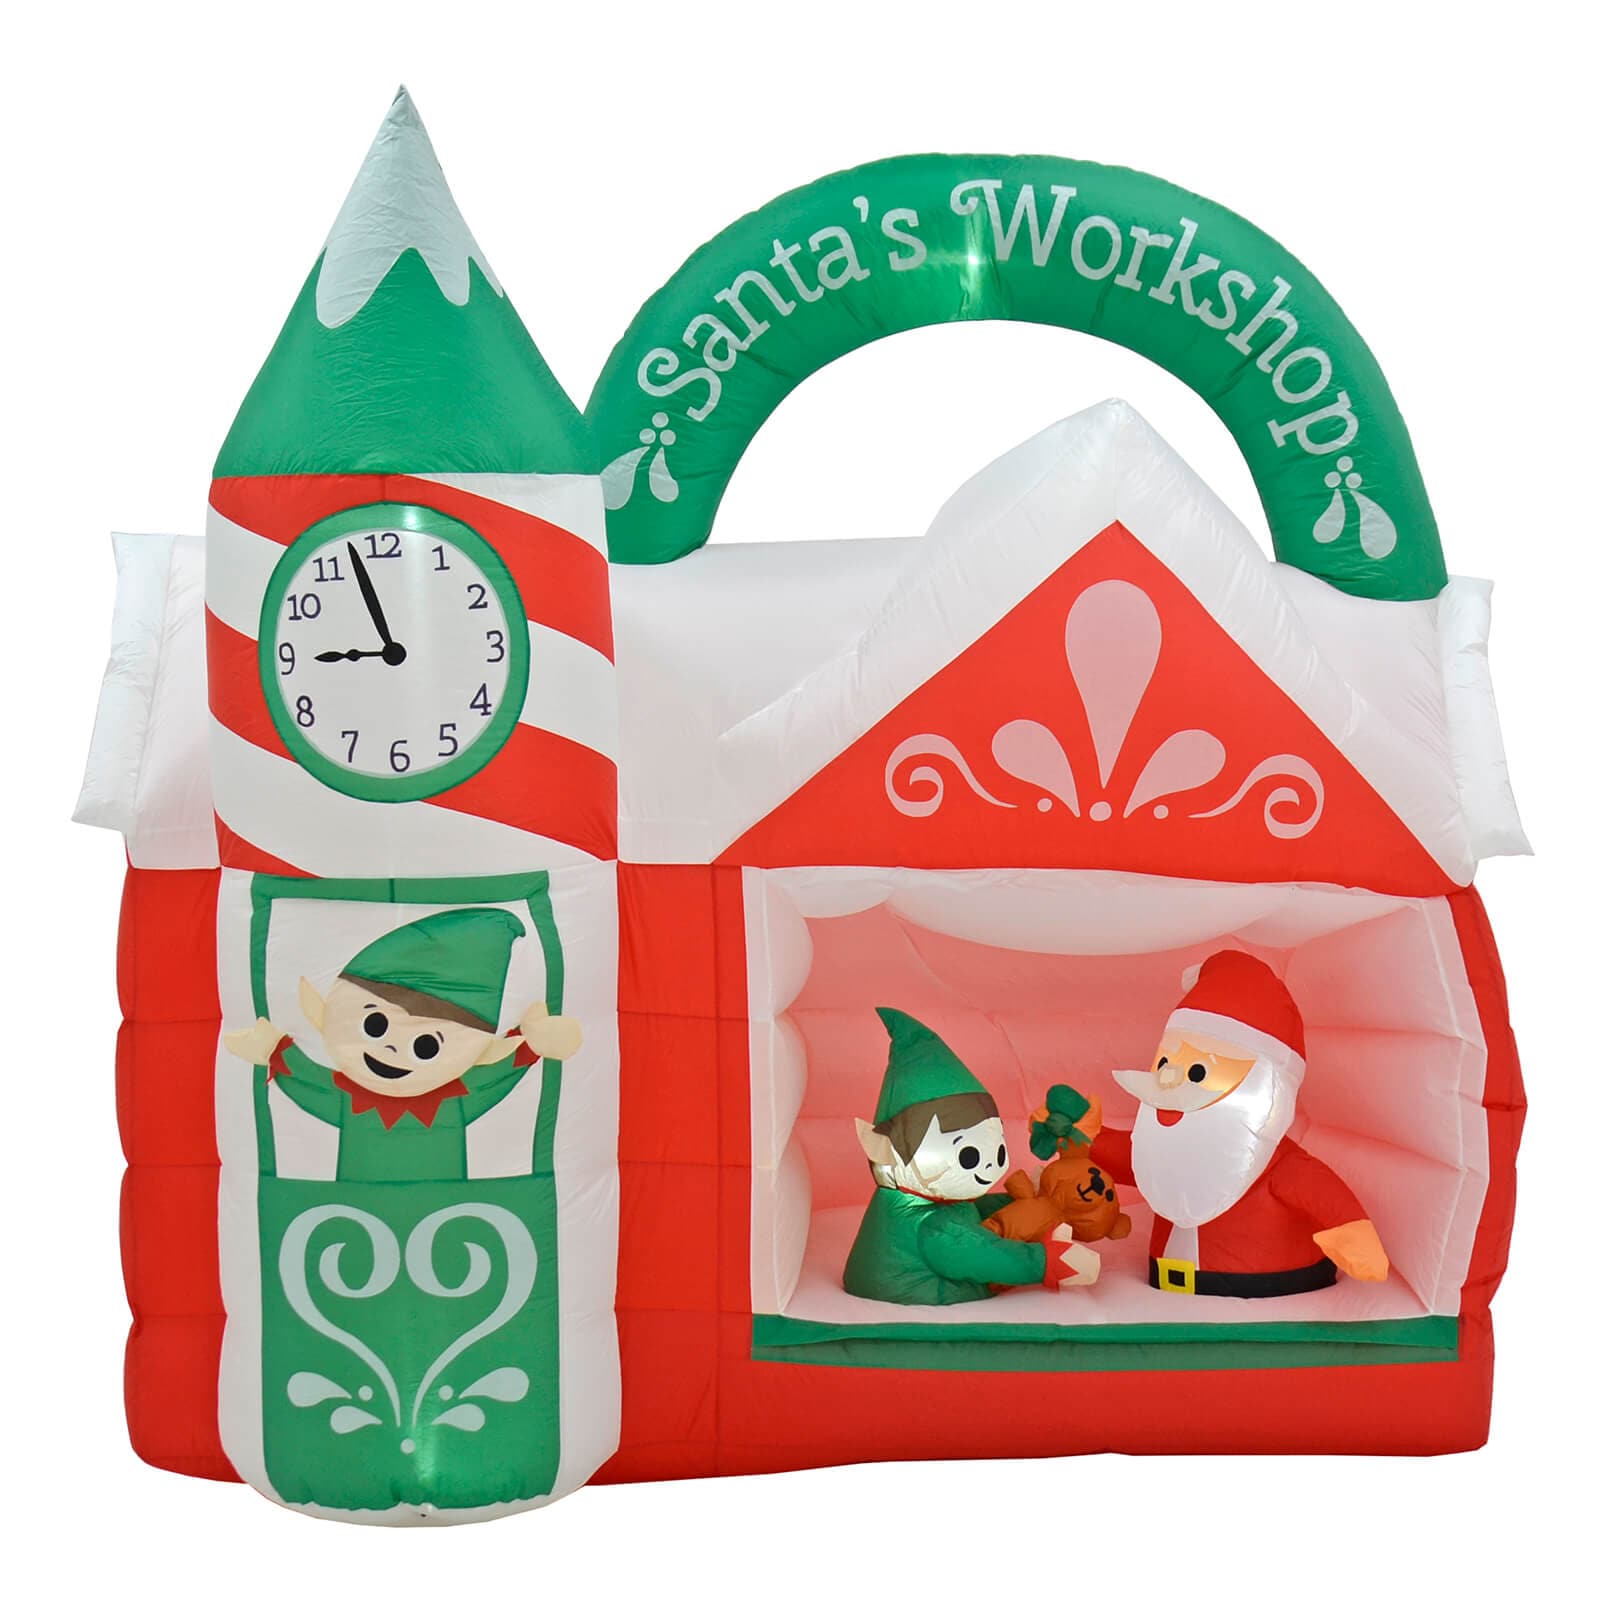 Large inflatable Christmas decoration with Santa and lef making toys in Santa's workshop with clock